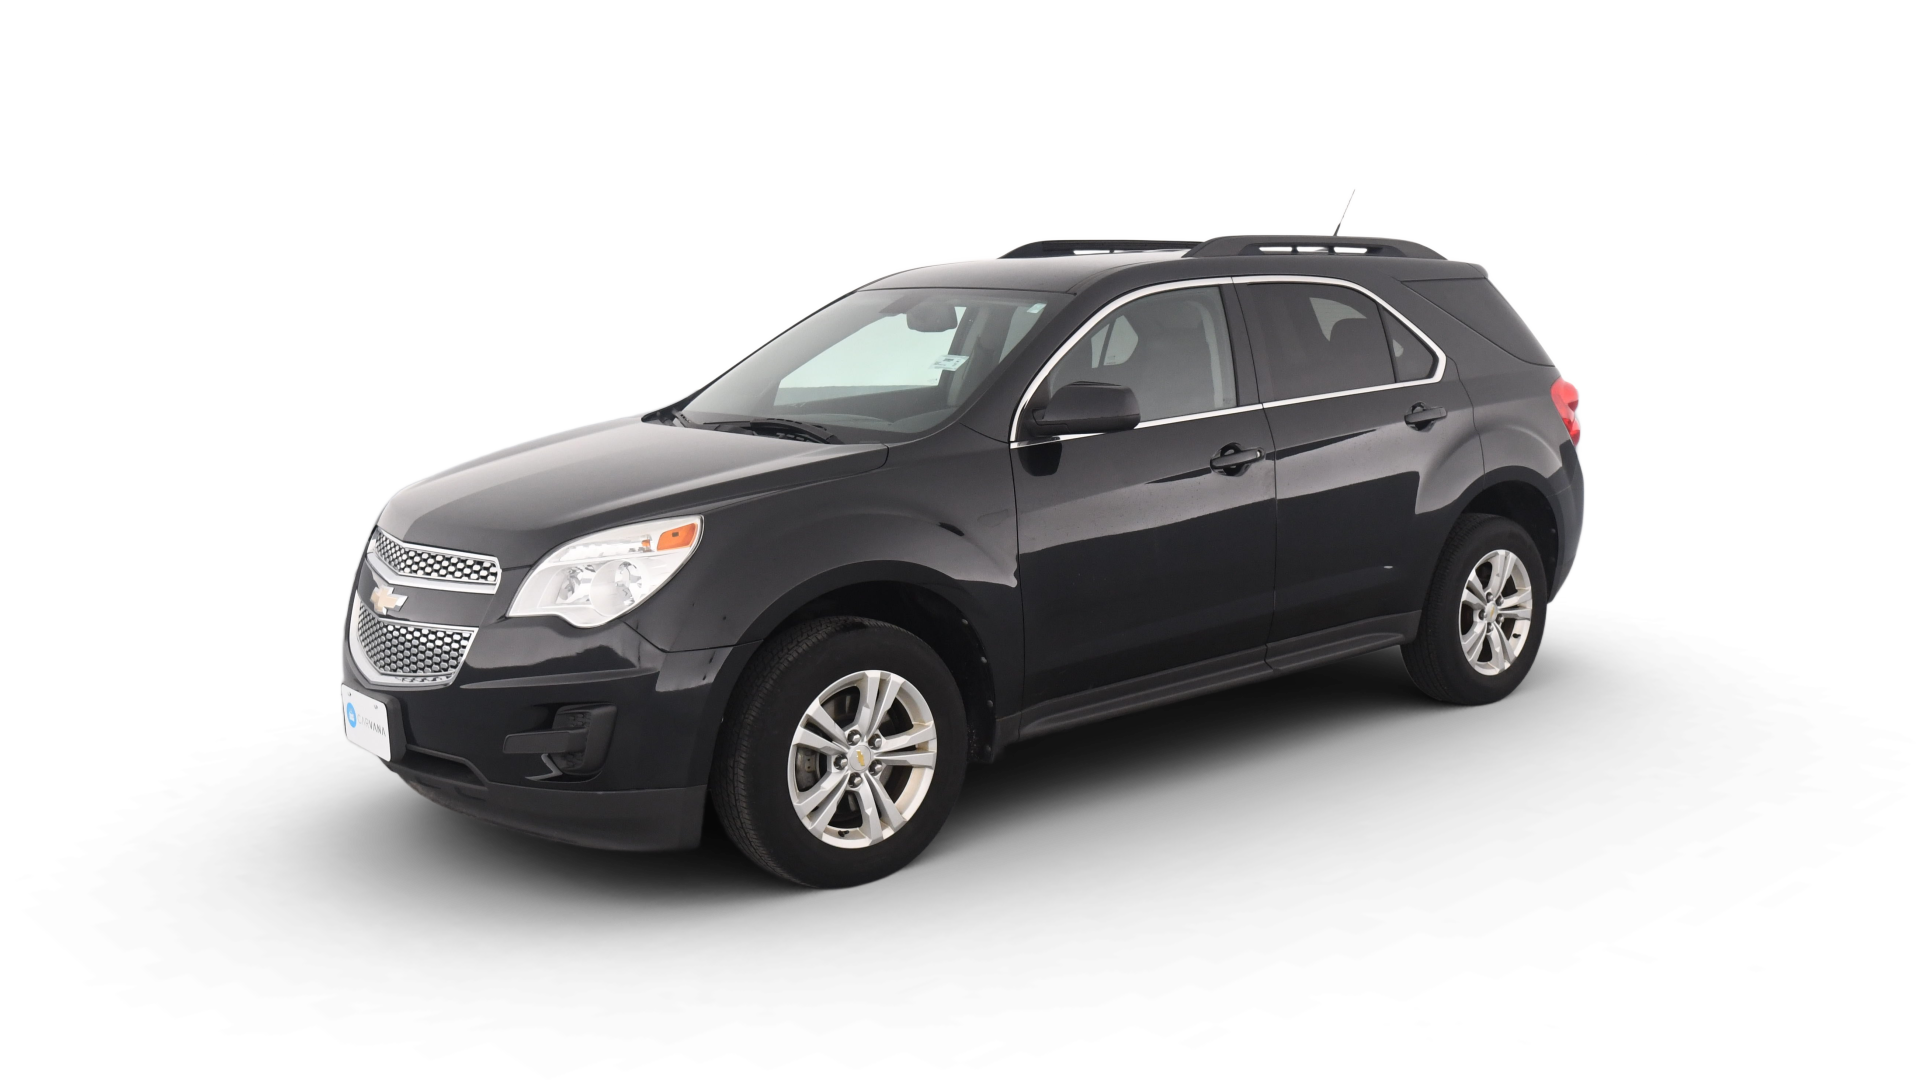 Used 2011 Chevrolet Equinox LT for sale in Madison, WI | Carvana